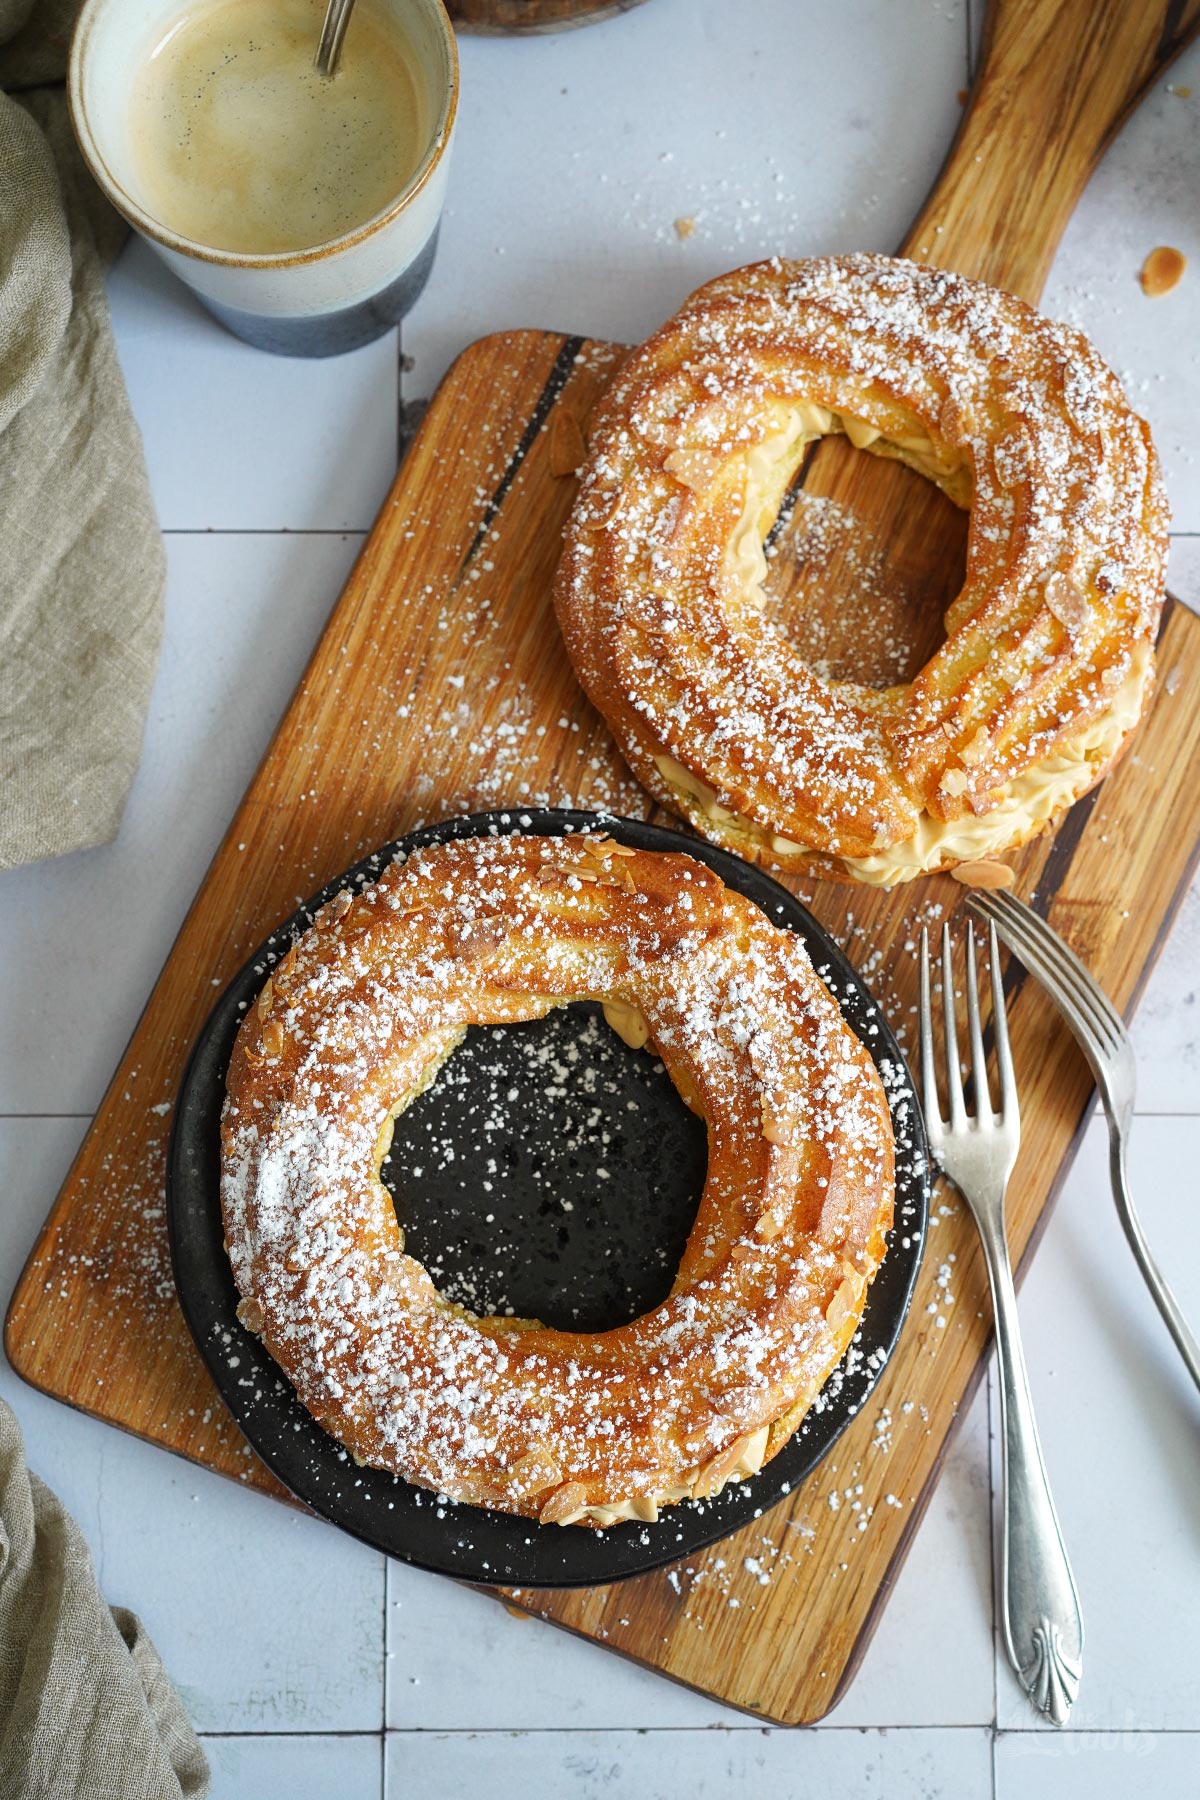 Paris Brest | Bake to the roots